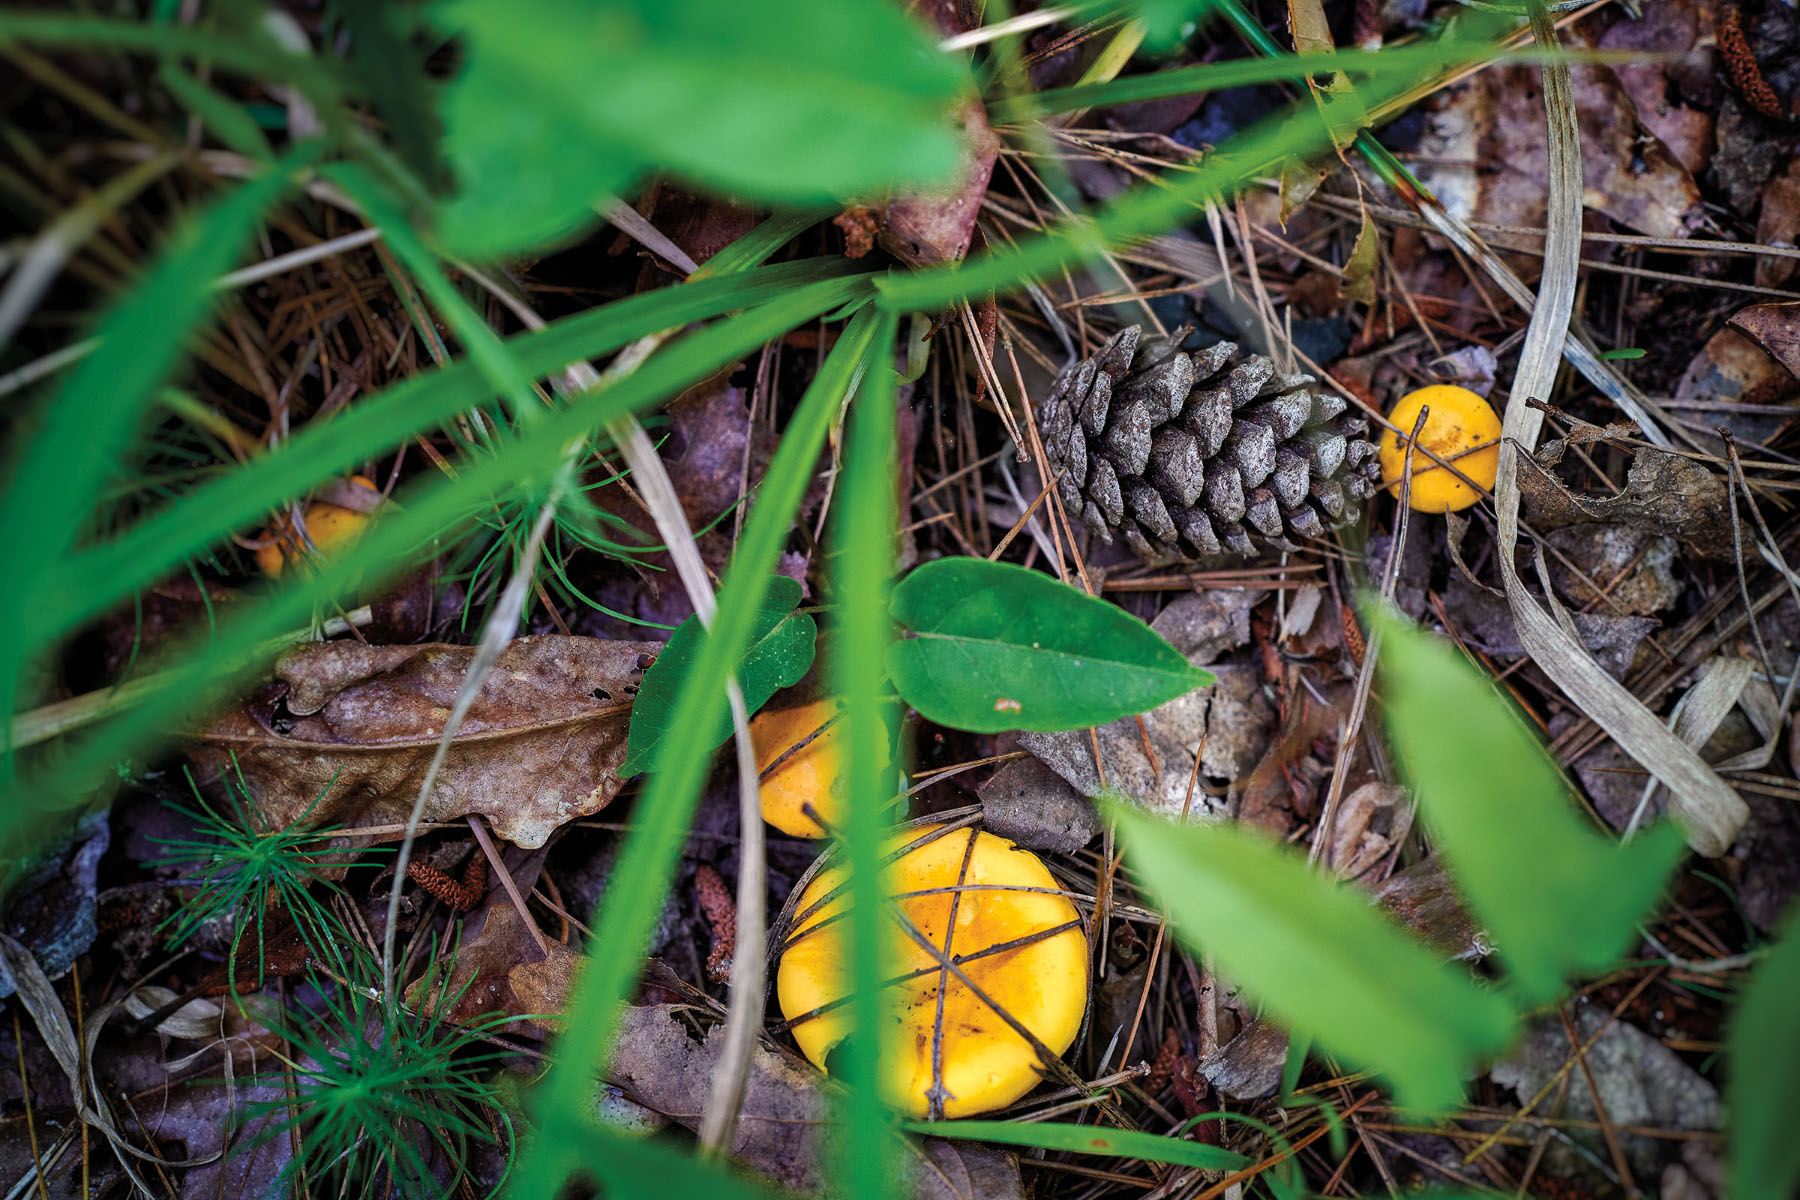 A collection of bright yellow mushrooms next to pinecones and green foliage